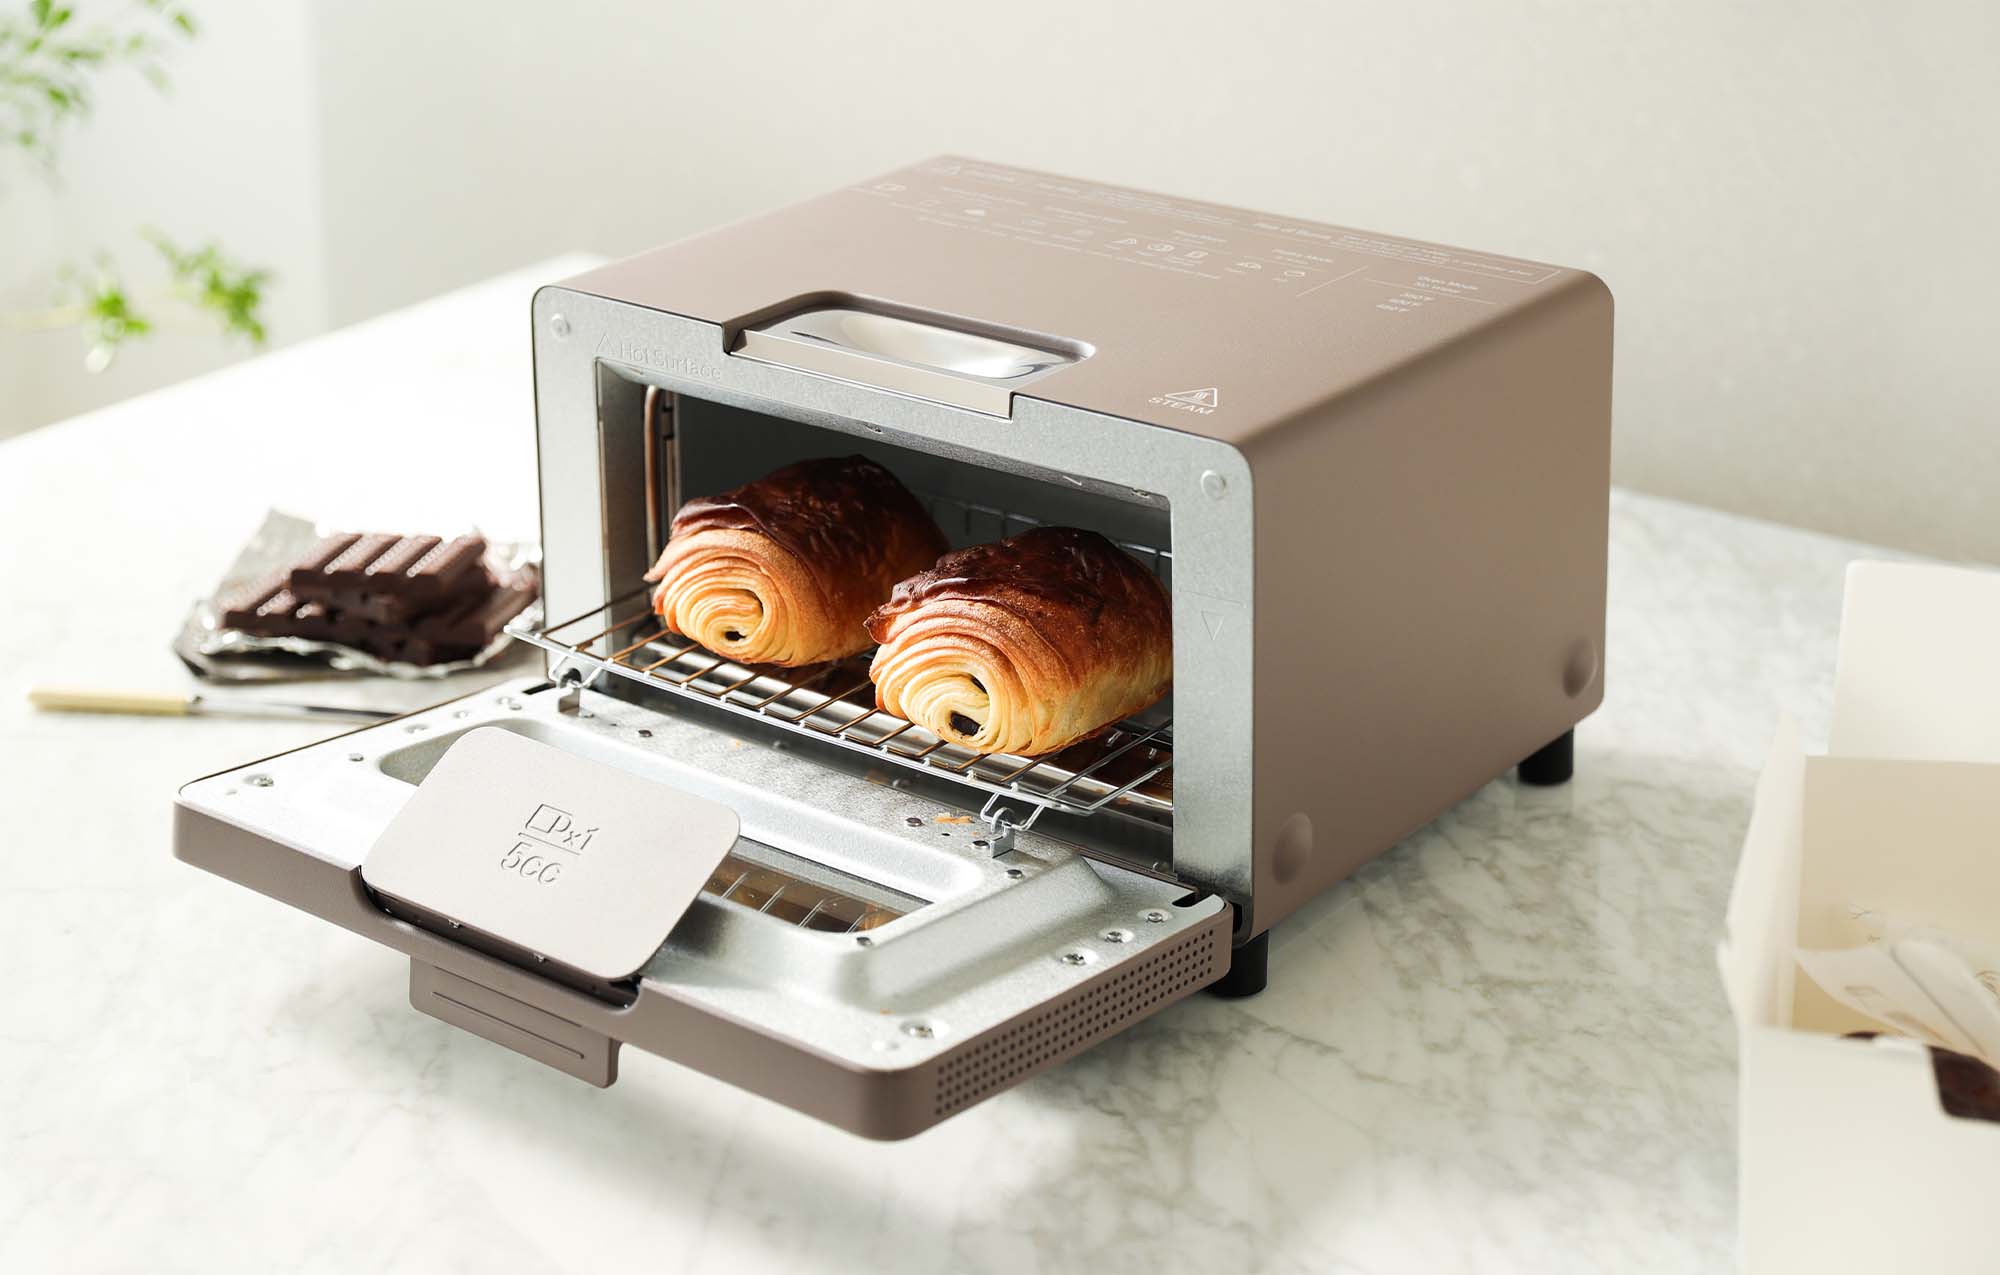  Mini Toaster Oven Cooker for Bread, Pizza and more